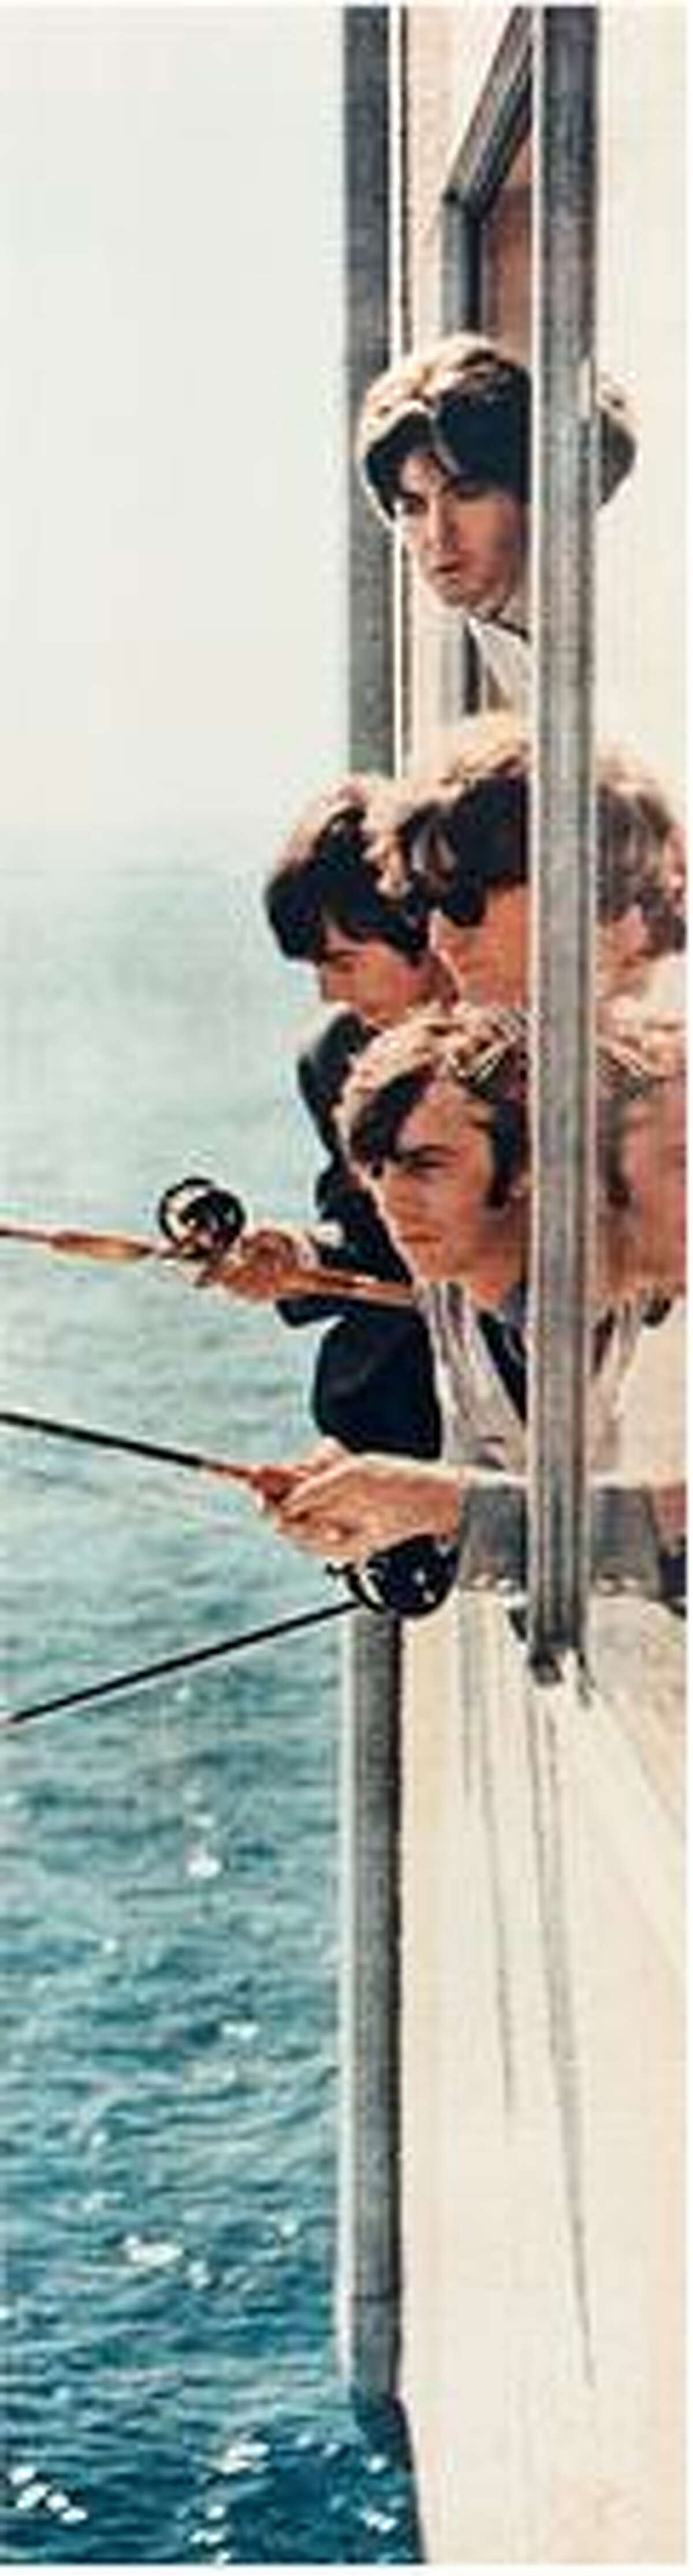 The Beatles fishing from a window in suite 272 at the Edgewater Hotel, Aug. 21, 1964. (Photo courtesy Edgewater Hotel)